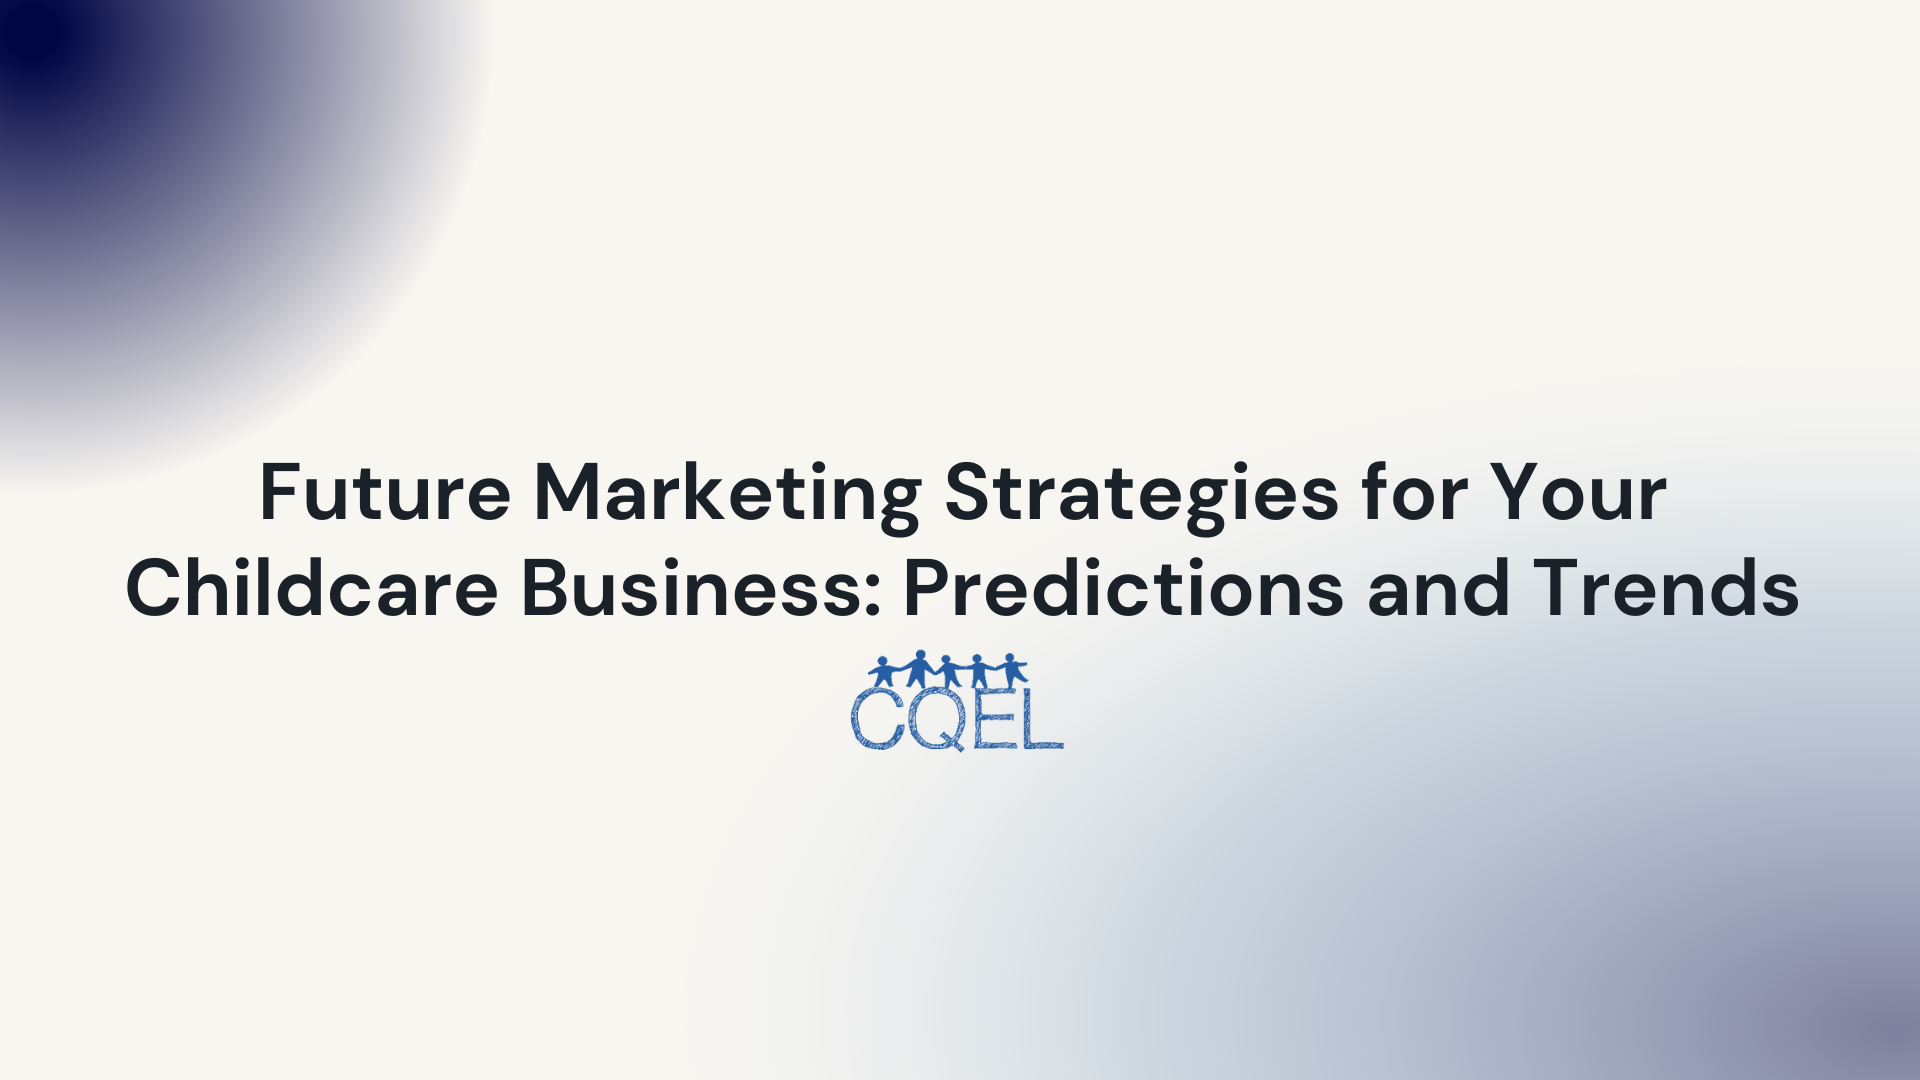 Future Marketing Strategies for Your Childcare Business: Predictions and Trends